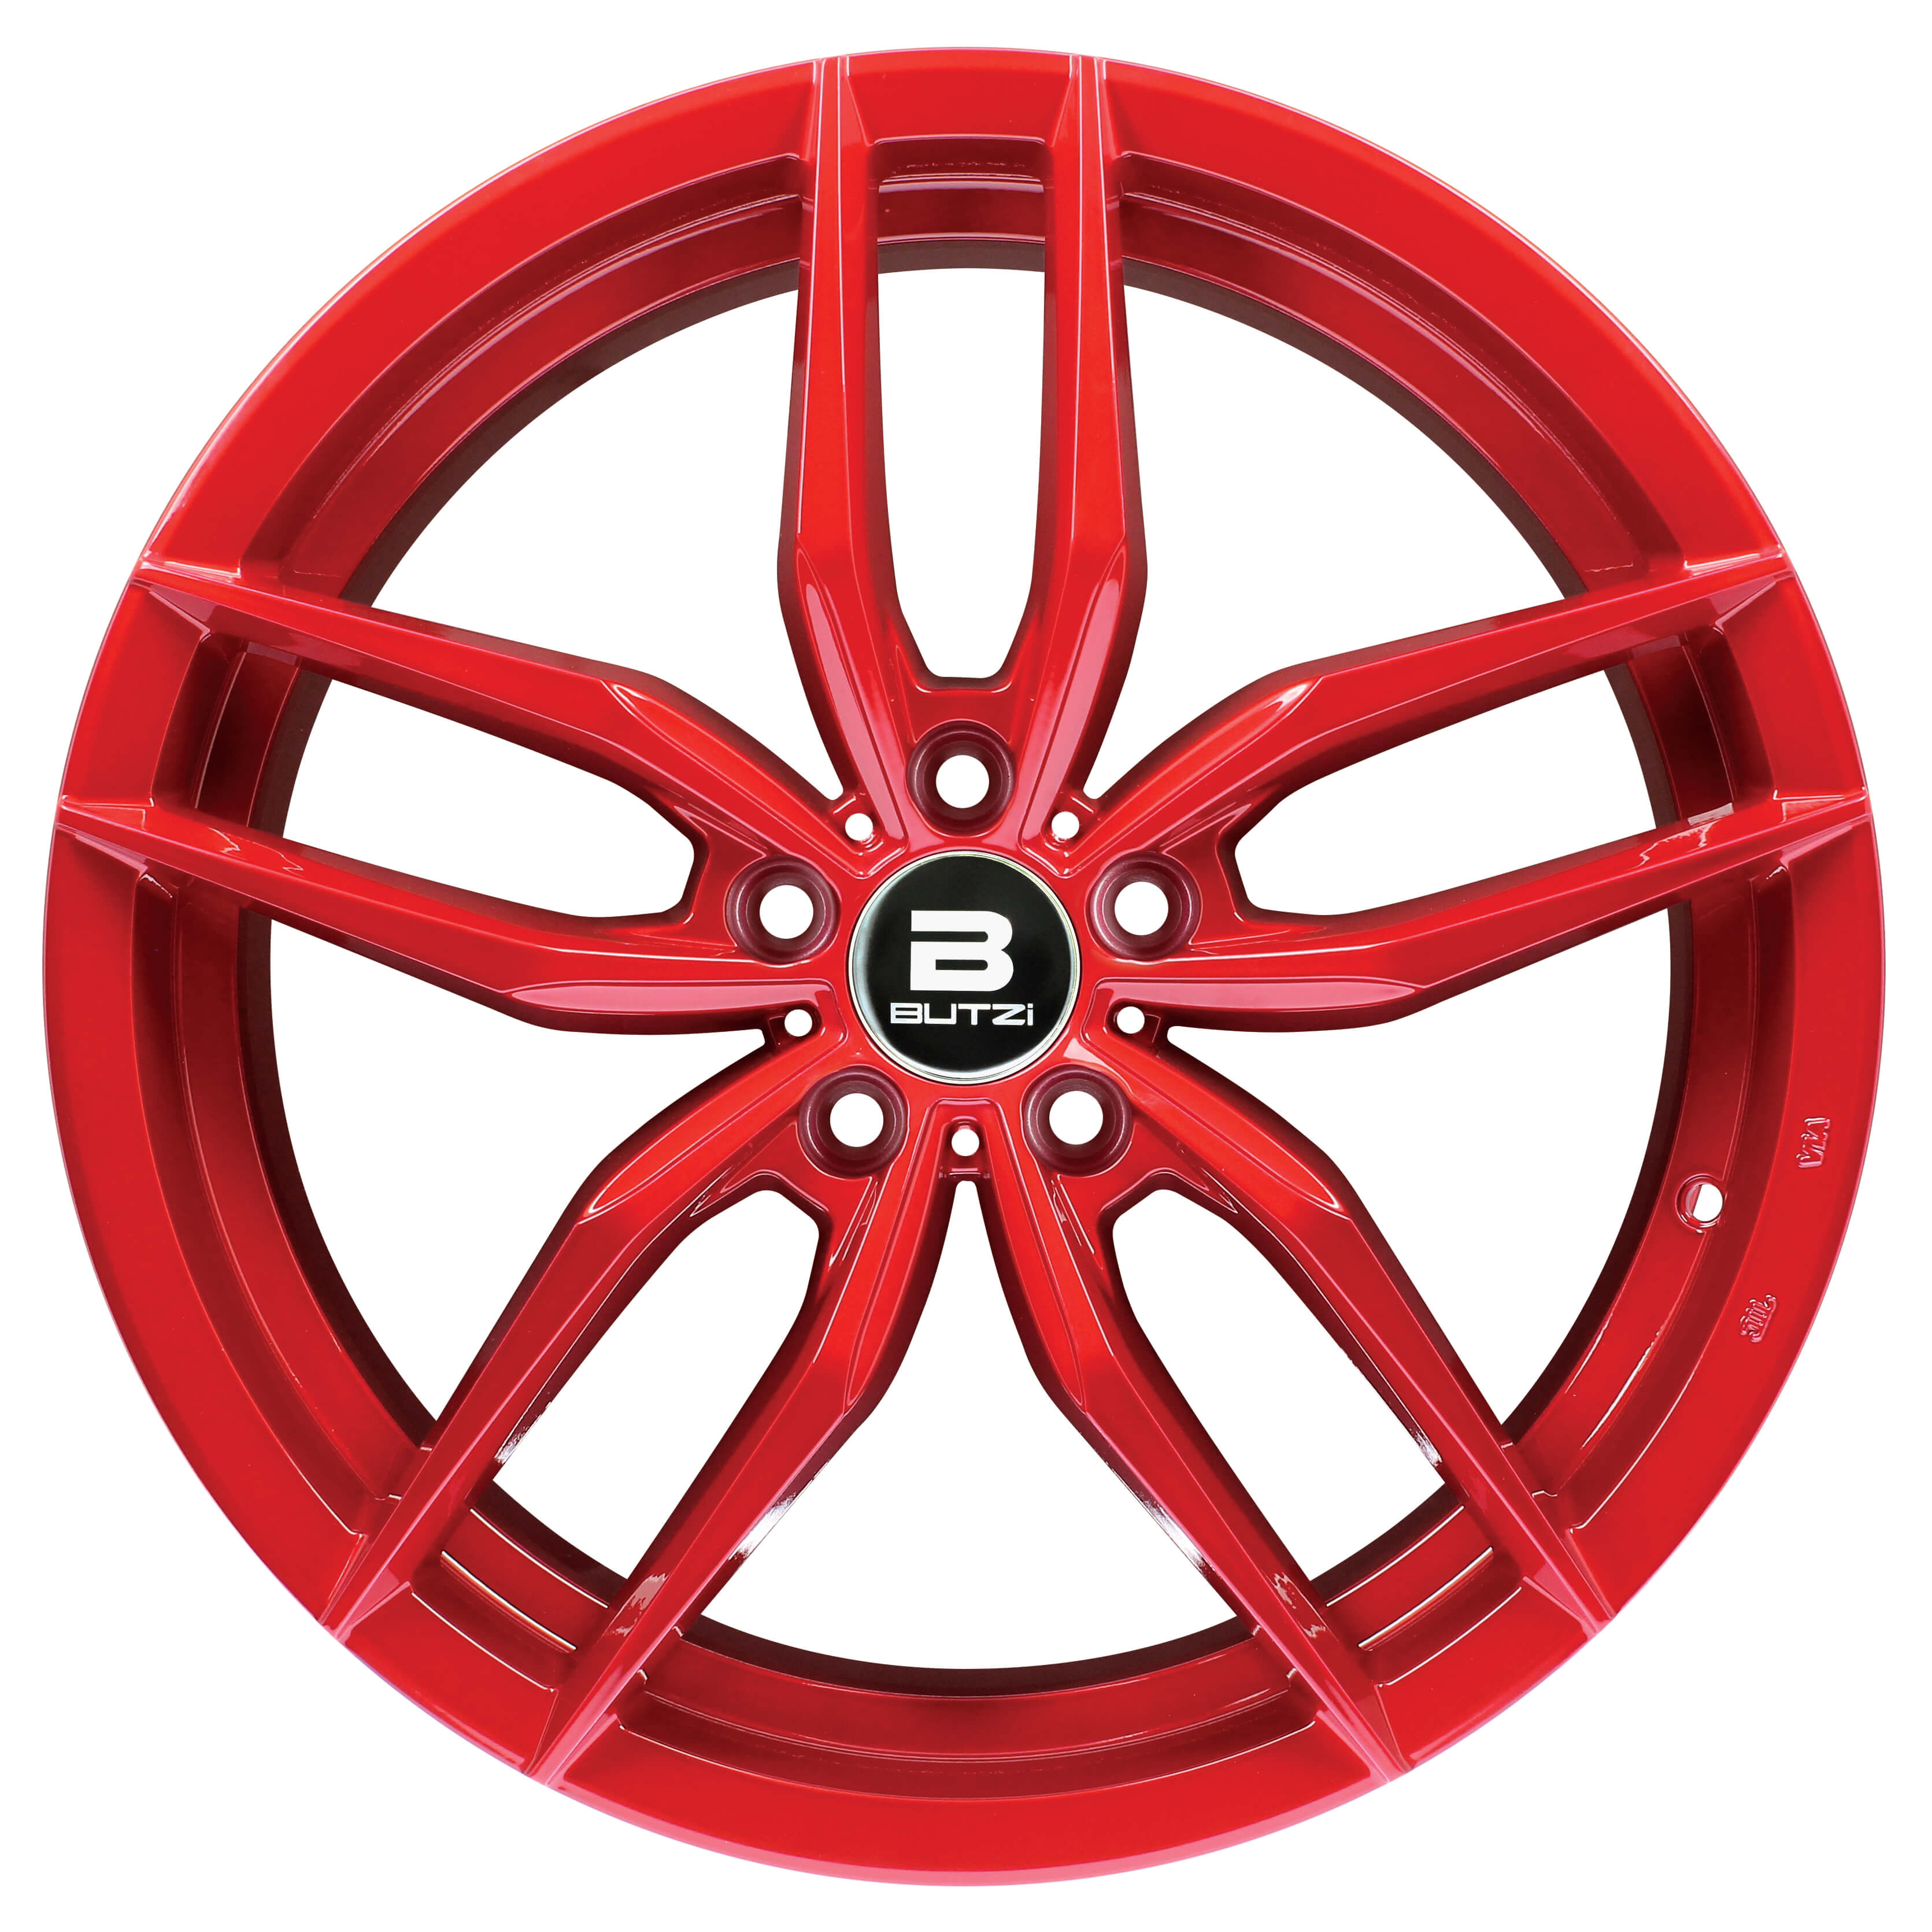 Jante MAMBA RED CANDY 9.5x19 5X120 ET25 CB74.1